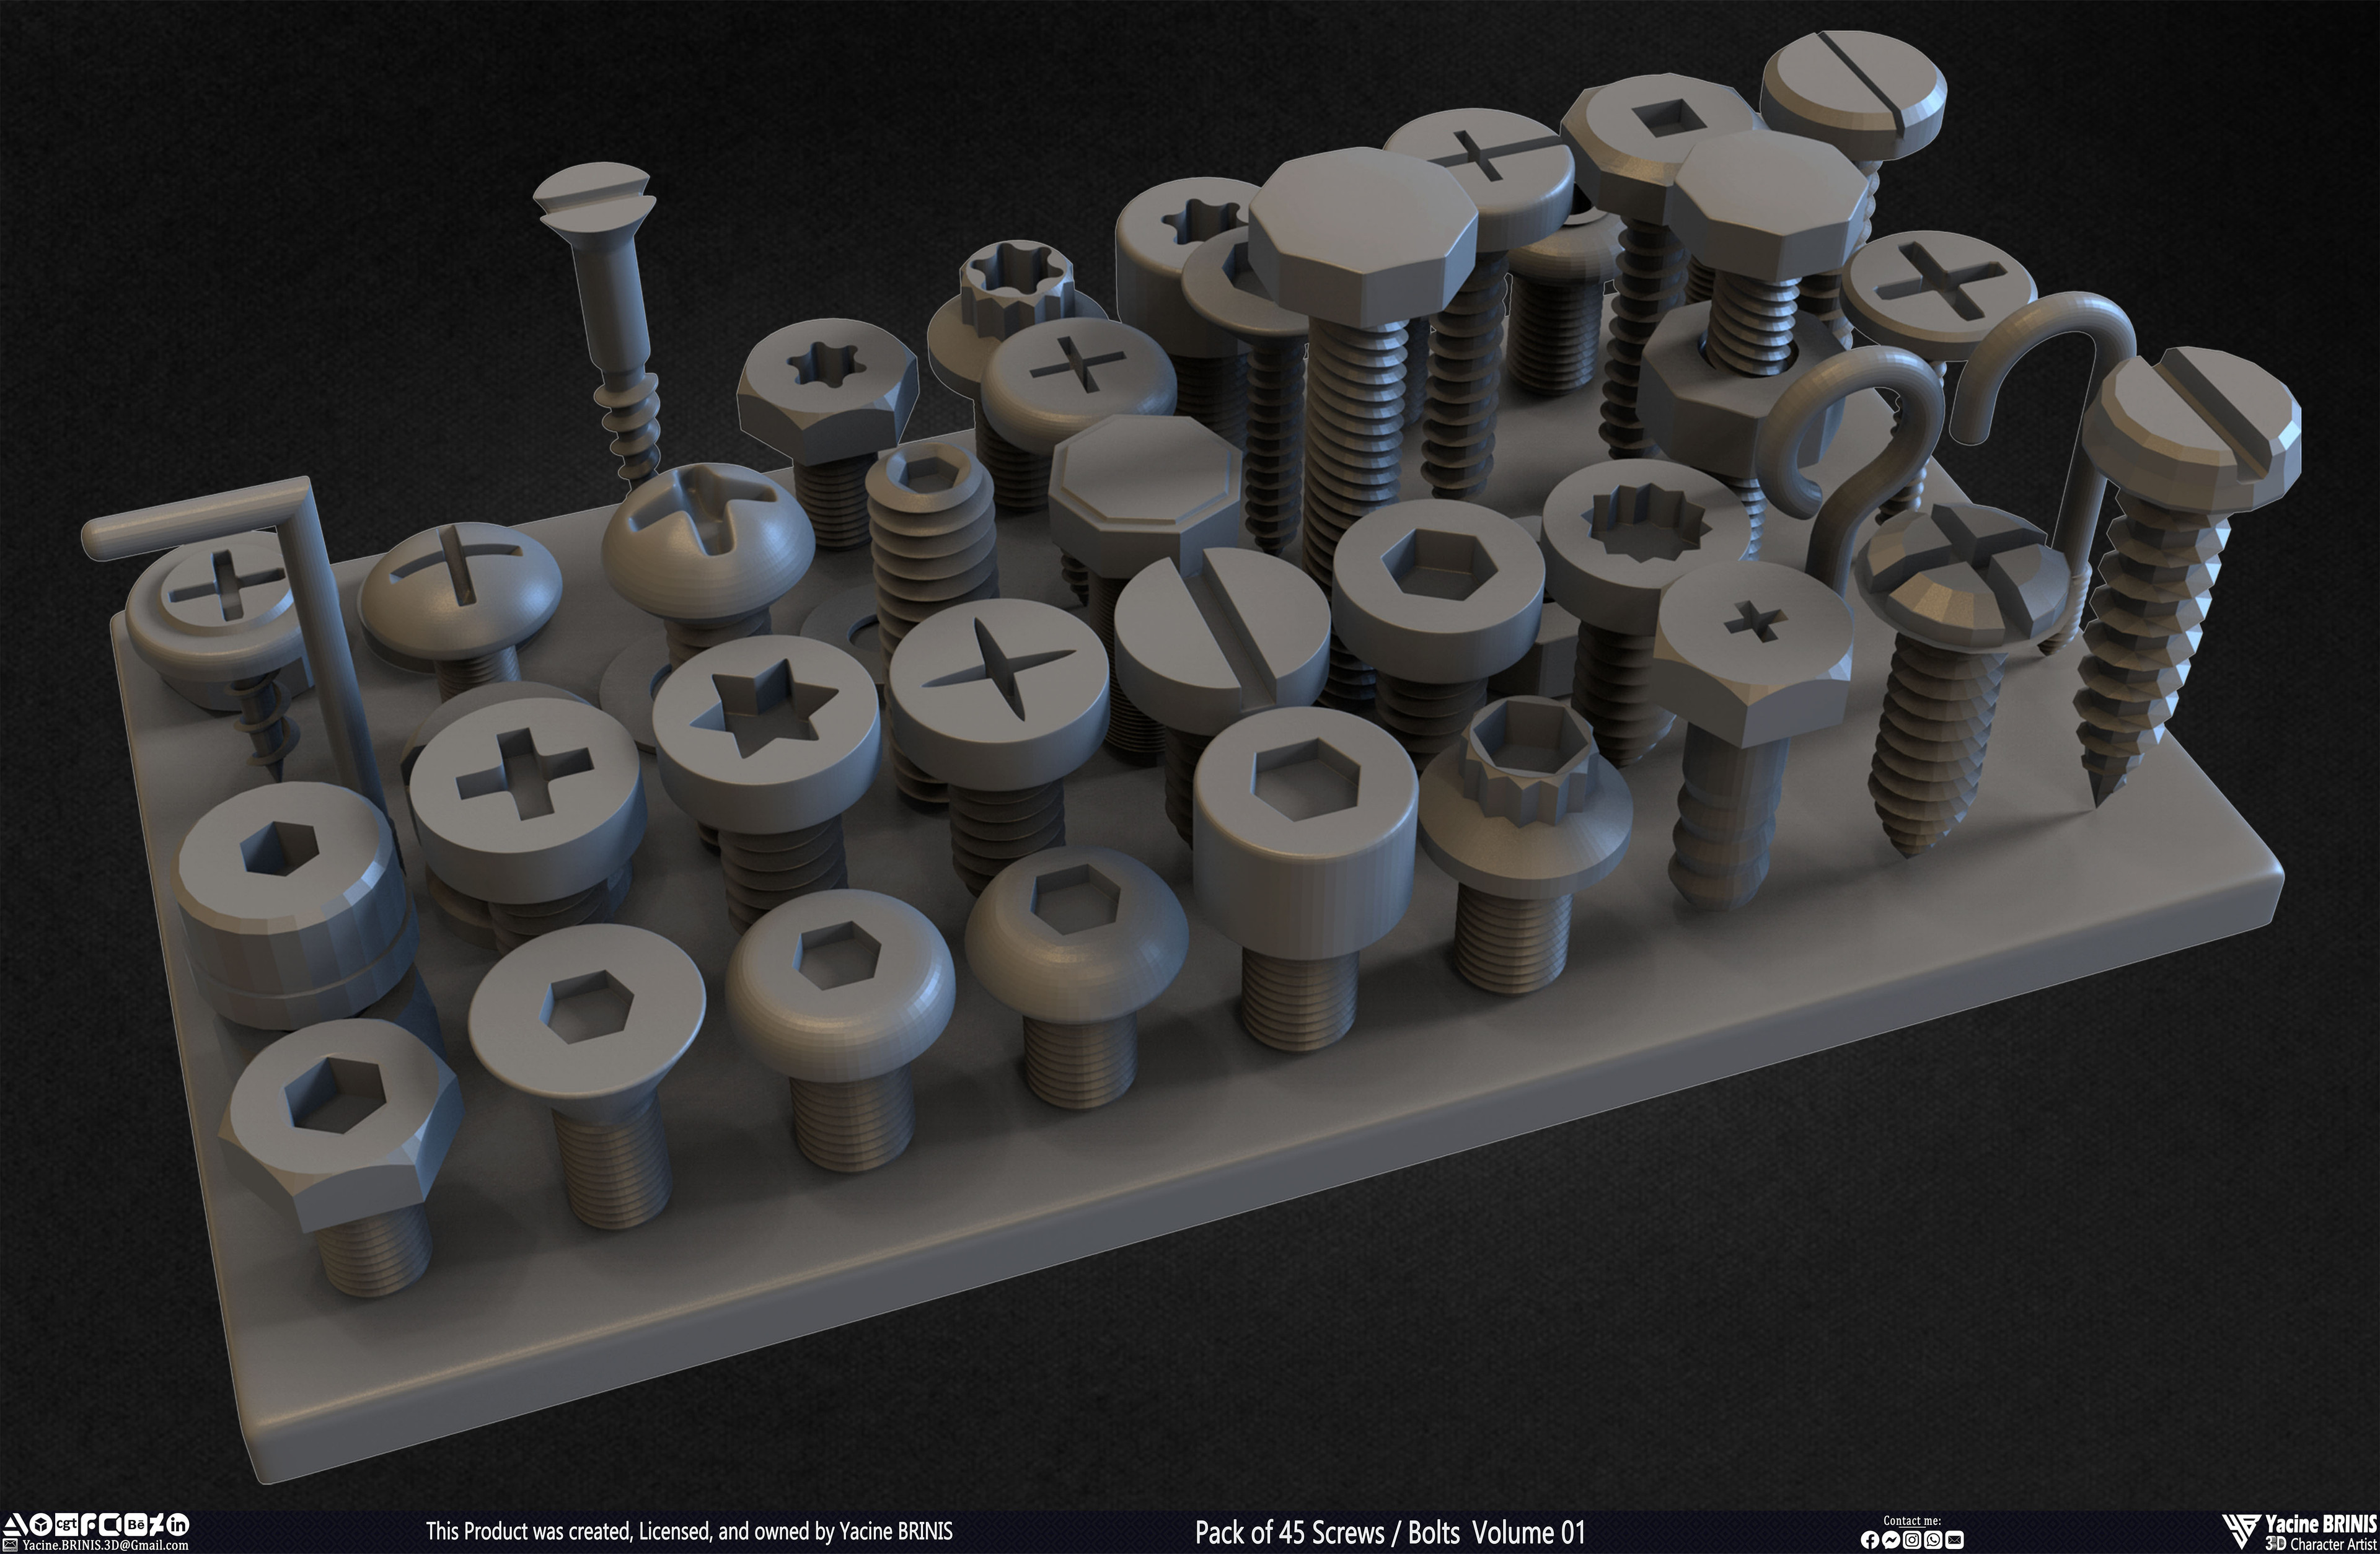 Pack of 45 Screws-Bolts Volume 01 Sculpted By Yacine BRINIS Set 015